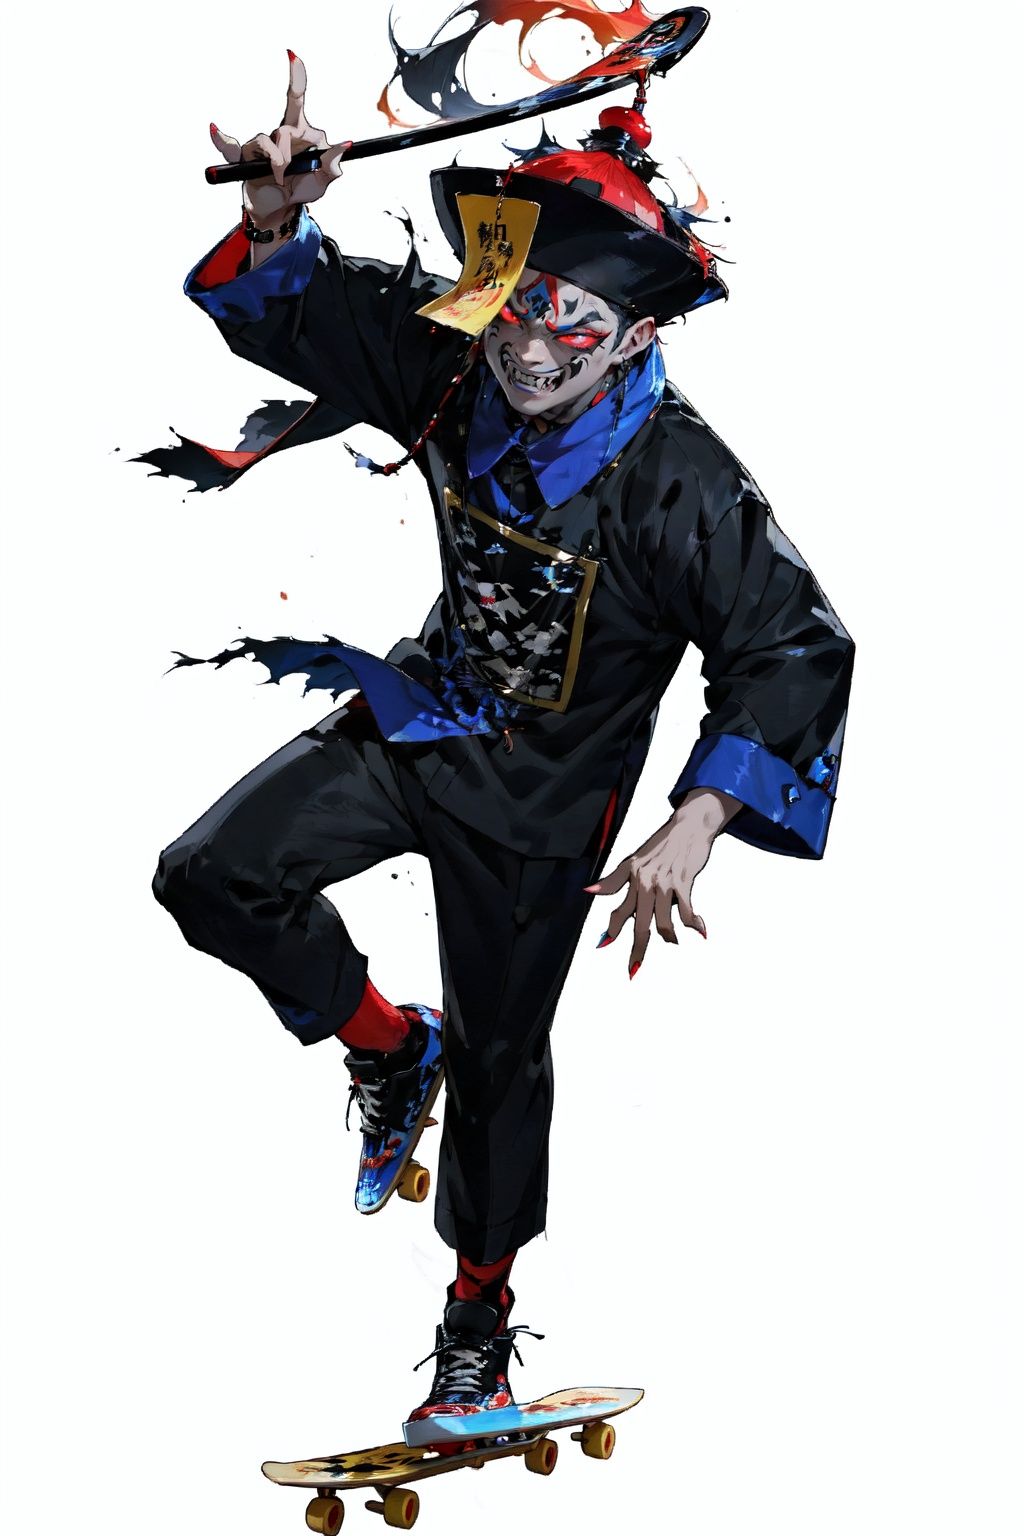 ((masterpiece)),((best quality)),8k,high detailed,ultra-detailed,upper body,((huangfu paper on head)),1boy,jiangshi costume,painted face,makeup,glowing red eyes, fangs, <lora:QDjiangshi:0.8>,((karaoke bar)),((skatepark)),(full-body portrait),(skateboarding pose),(sinister grin),(urban color palette),(dynamic motion blur),(punk rock atmosphere),In a vibrant skatepark,a male Jiangshi showcases skateboarding skills with a sinister grin. The urban color palette and dynamic motion blur create a punk rock atmosphere,<lora:coloricher:0.5>,